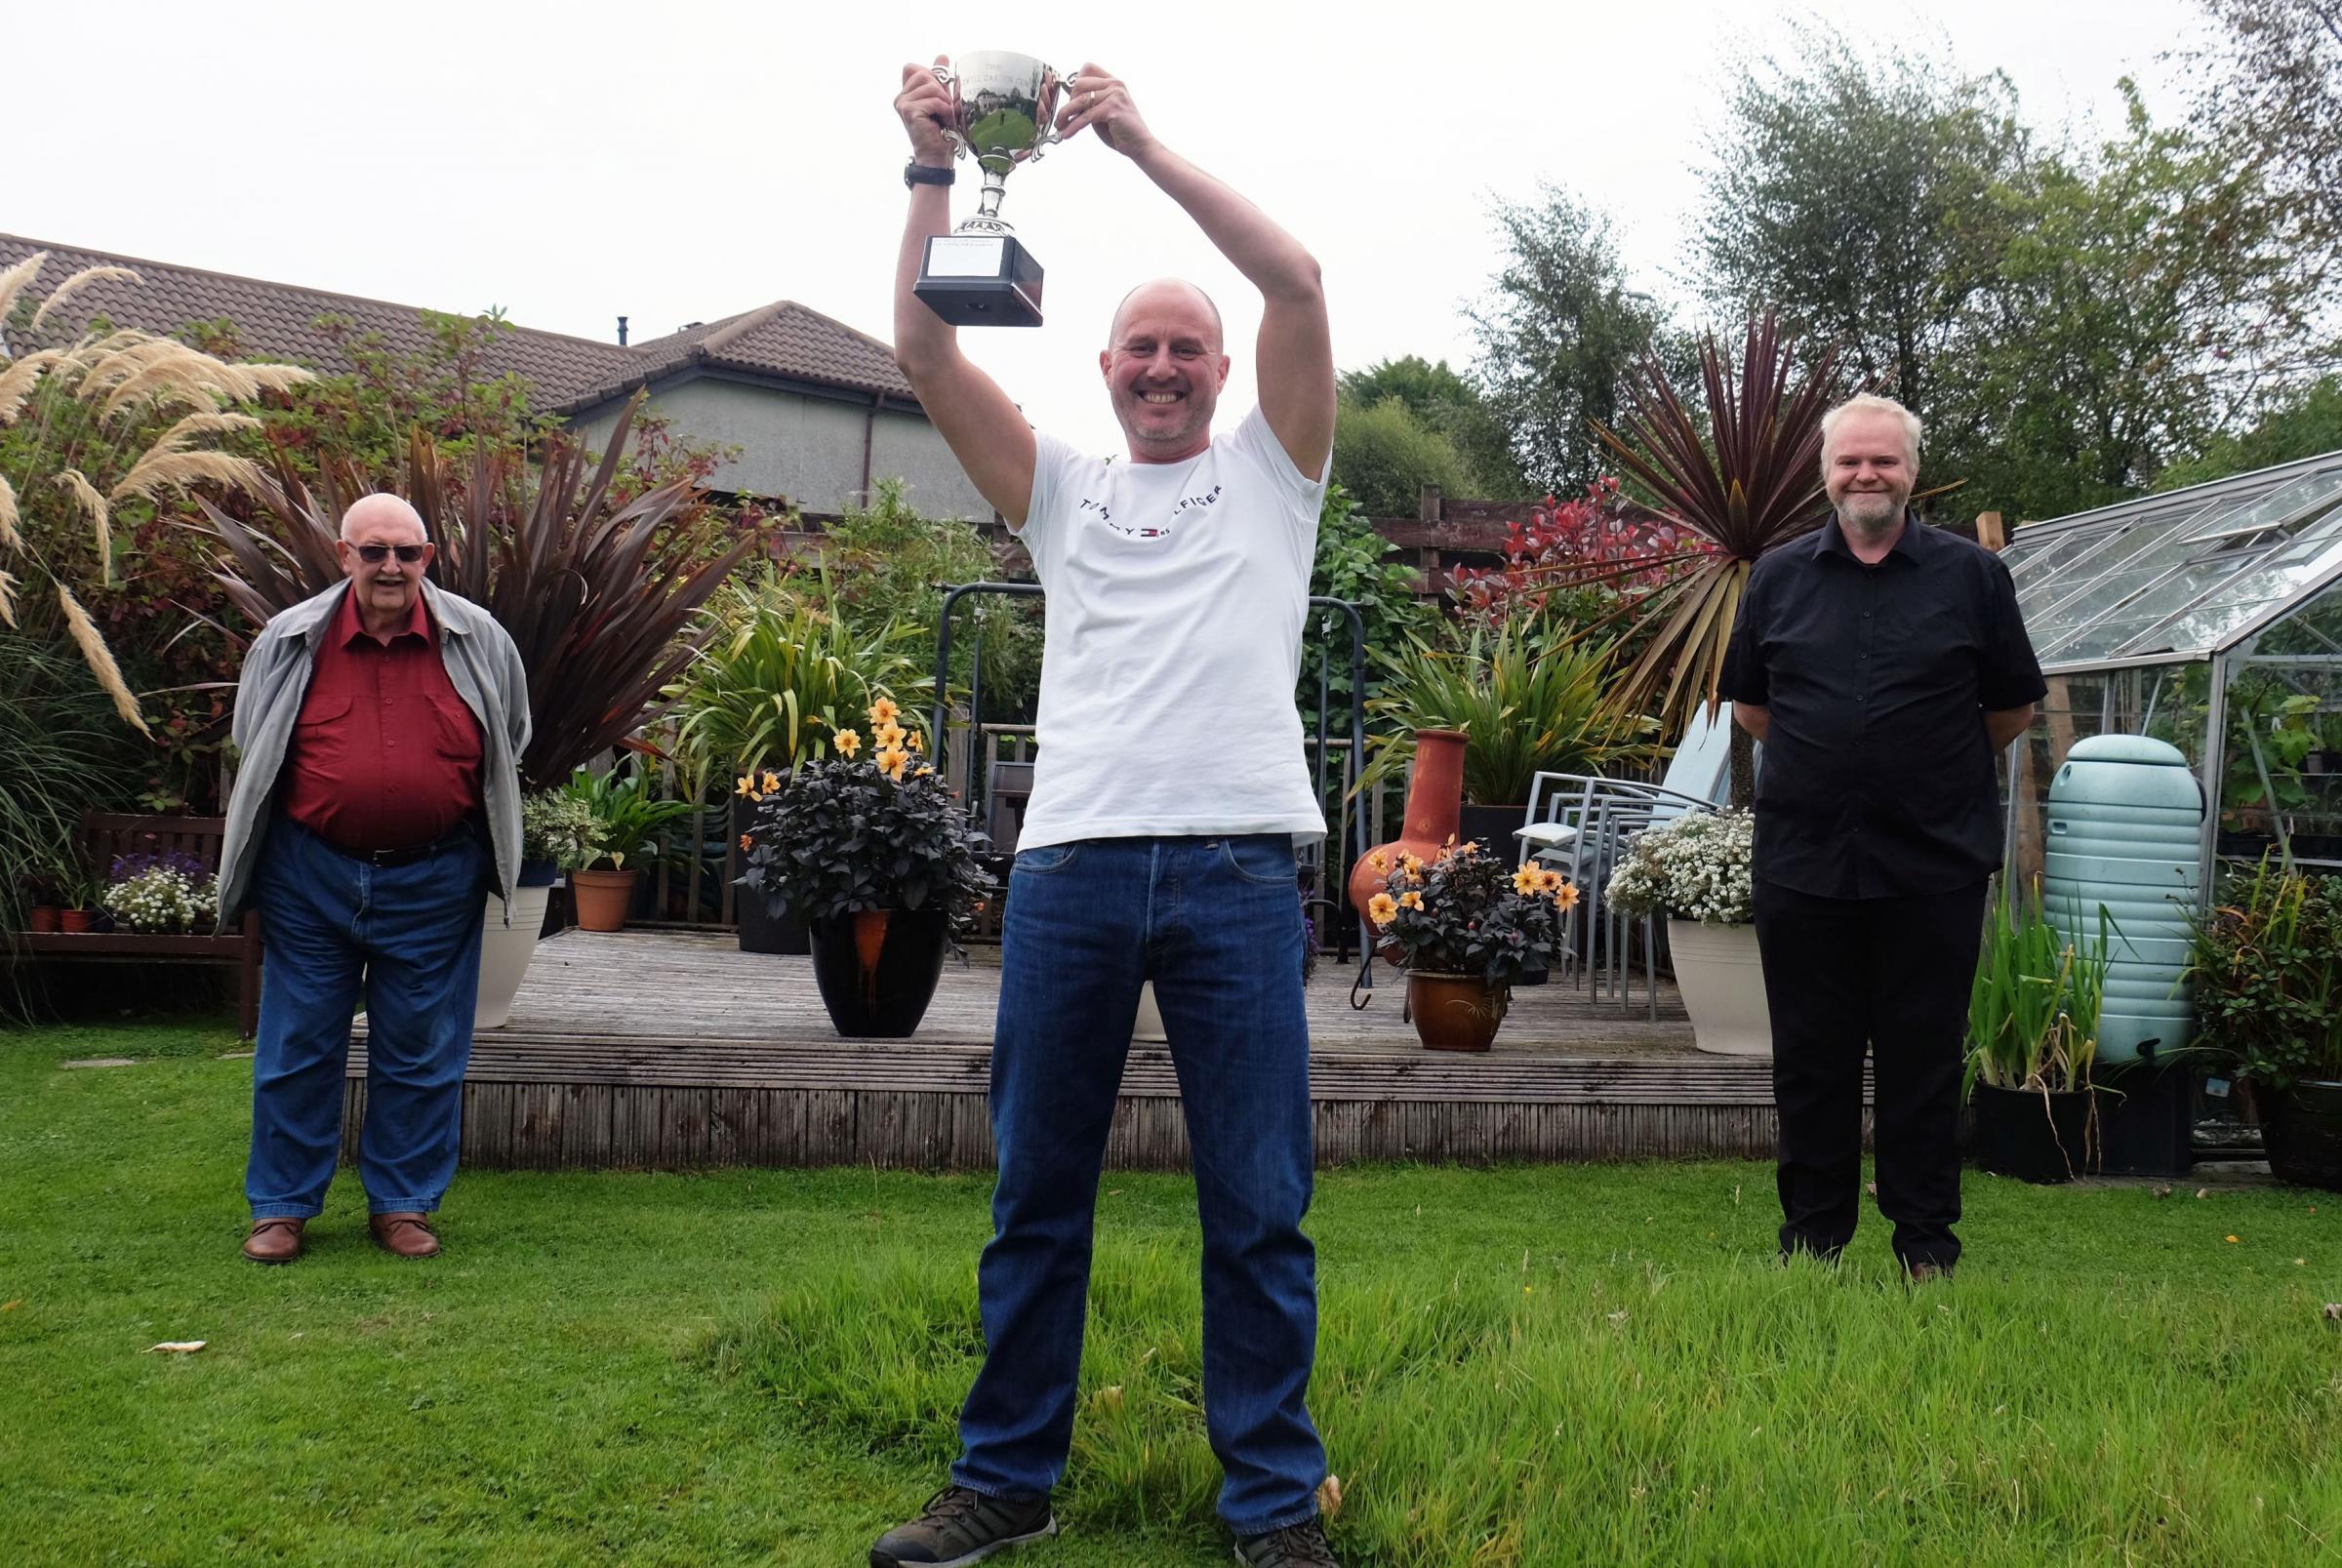 Search on to find Inverclyde's greatest garden